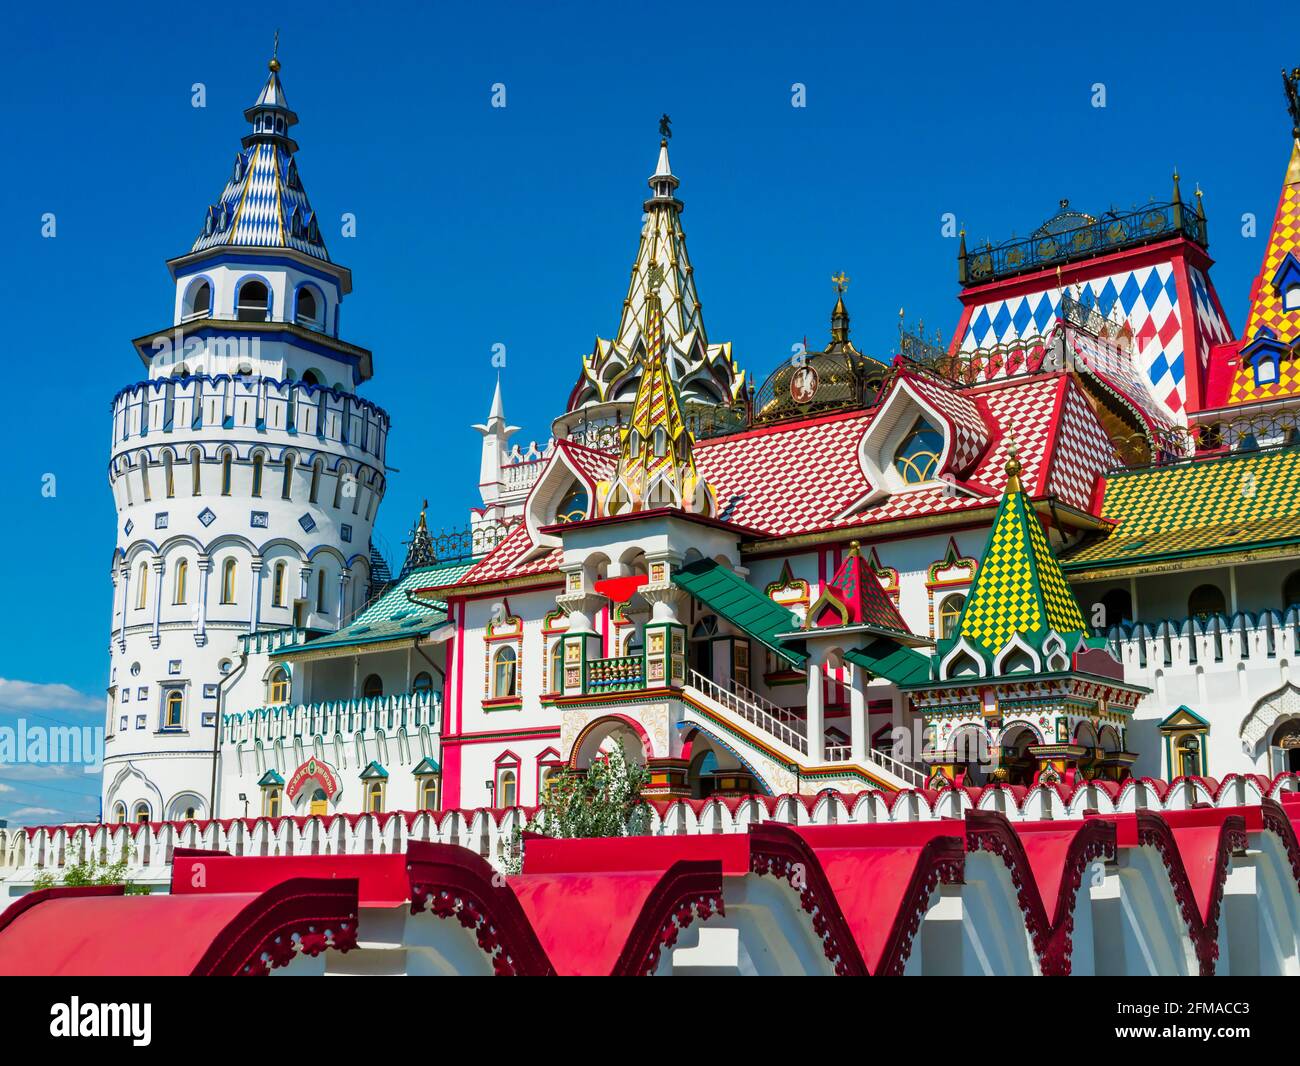 Impressive view of the colored architectures of Izmailovsky Kremlin, famous for its souvenirs market, Moscow, Russia Stock Photo